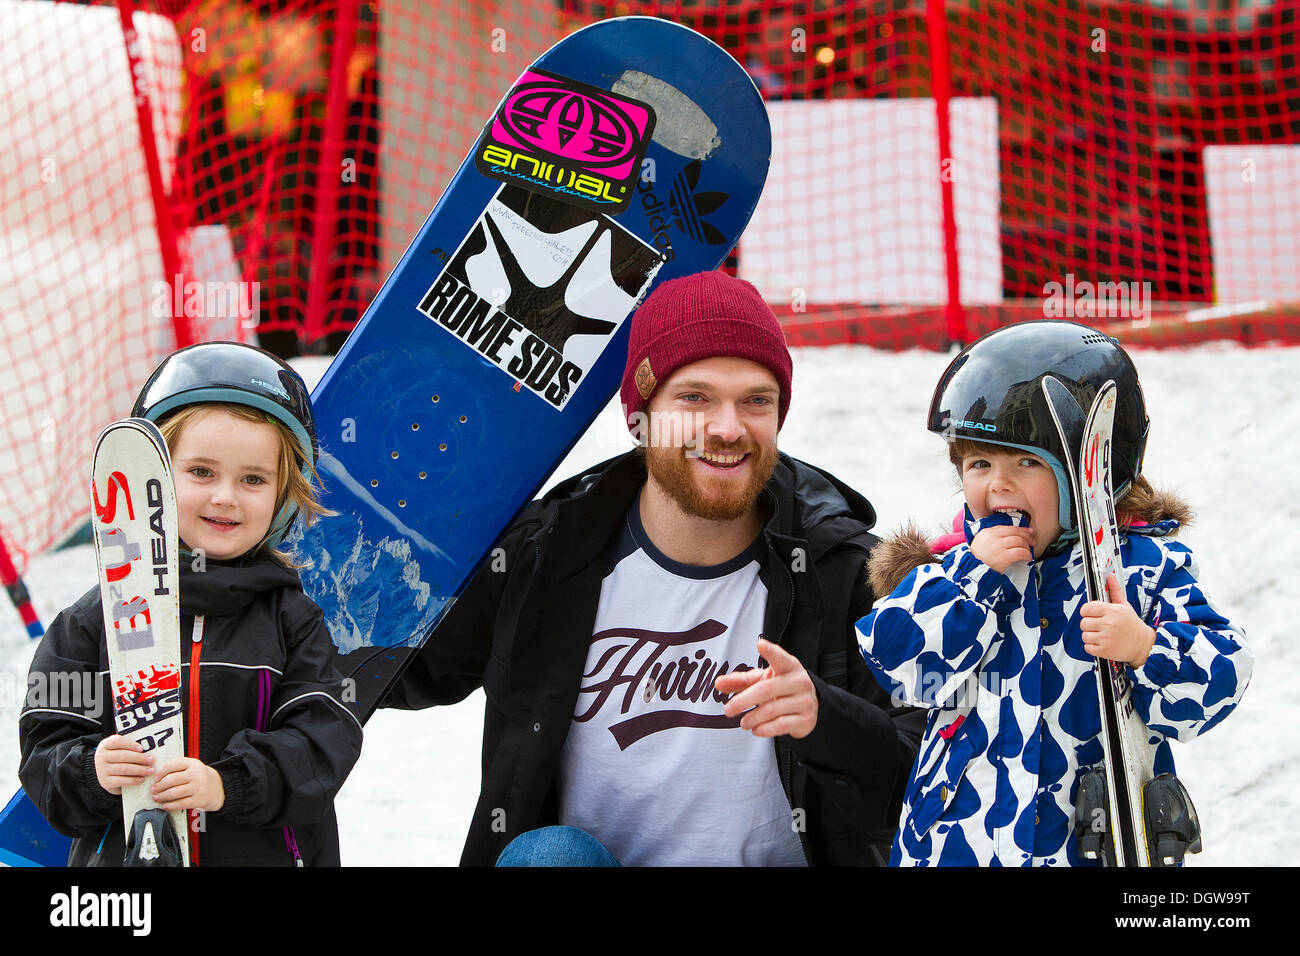 London, UK. 25th Oct, 2013. Great Britain and Winter Olympic Snowboarding hopeful Dom Harrington  opens the 'London Snow' event in Covent Garden giving members of the public a chance to try their hand at skiing and snowboarding on real snow.   © theodore liasi/Alamy Live News Stock Photo